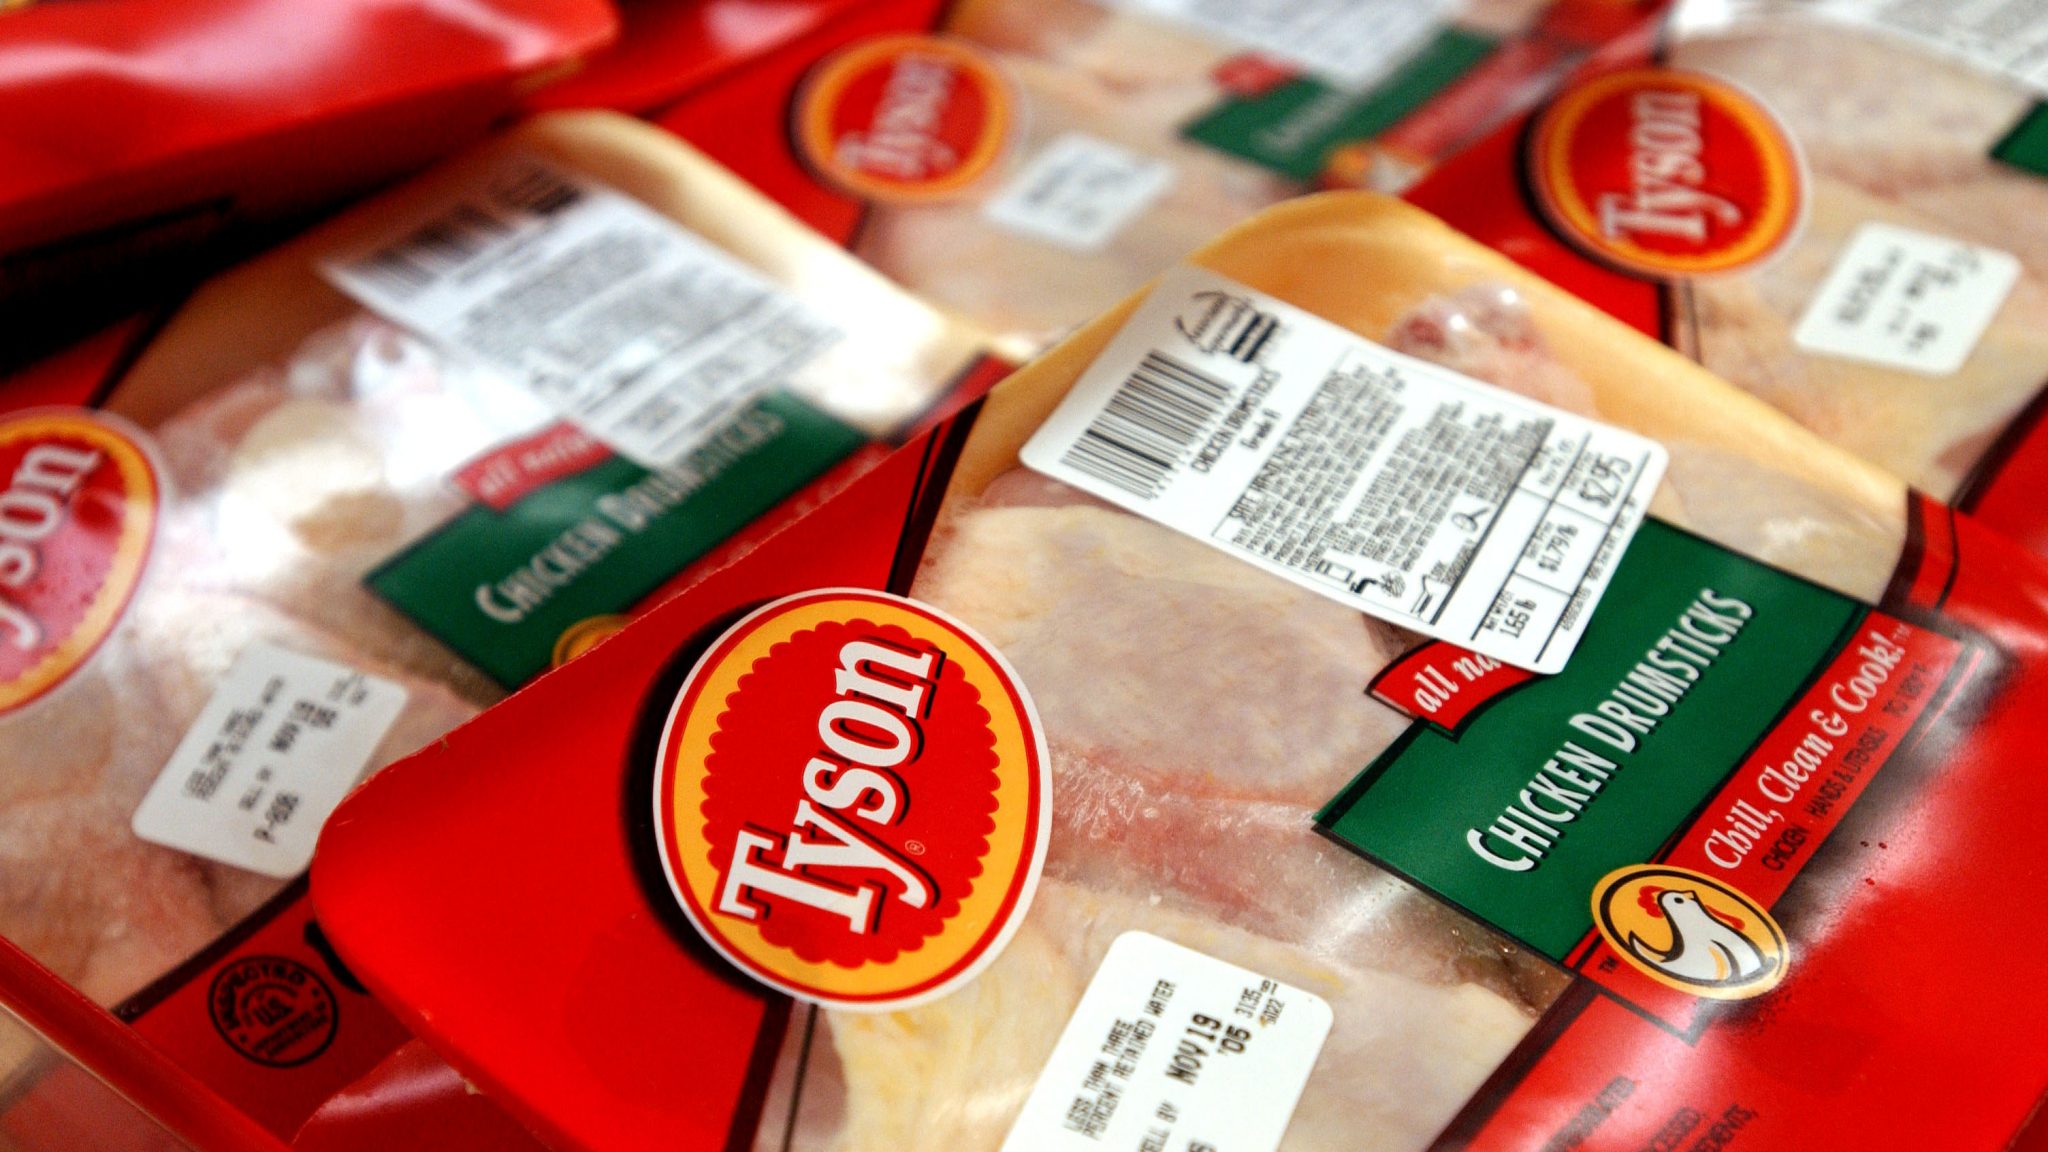 ‘The Food Supply Chain Is Breaking.’ Tyson Foods Warns of Meat Shortage